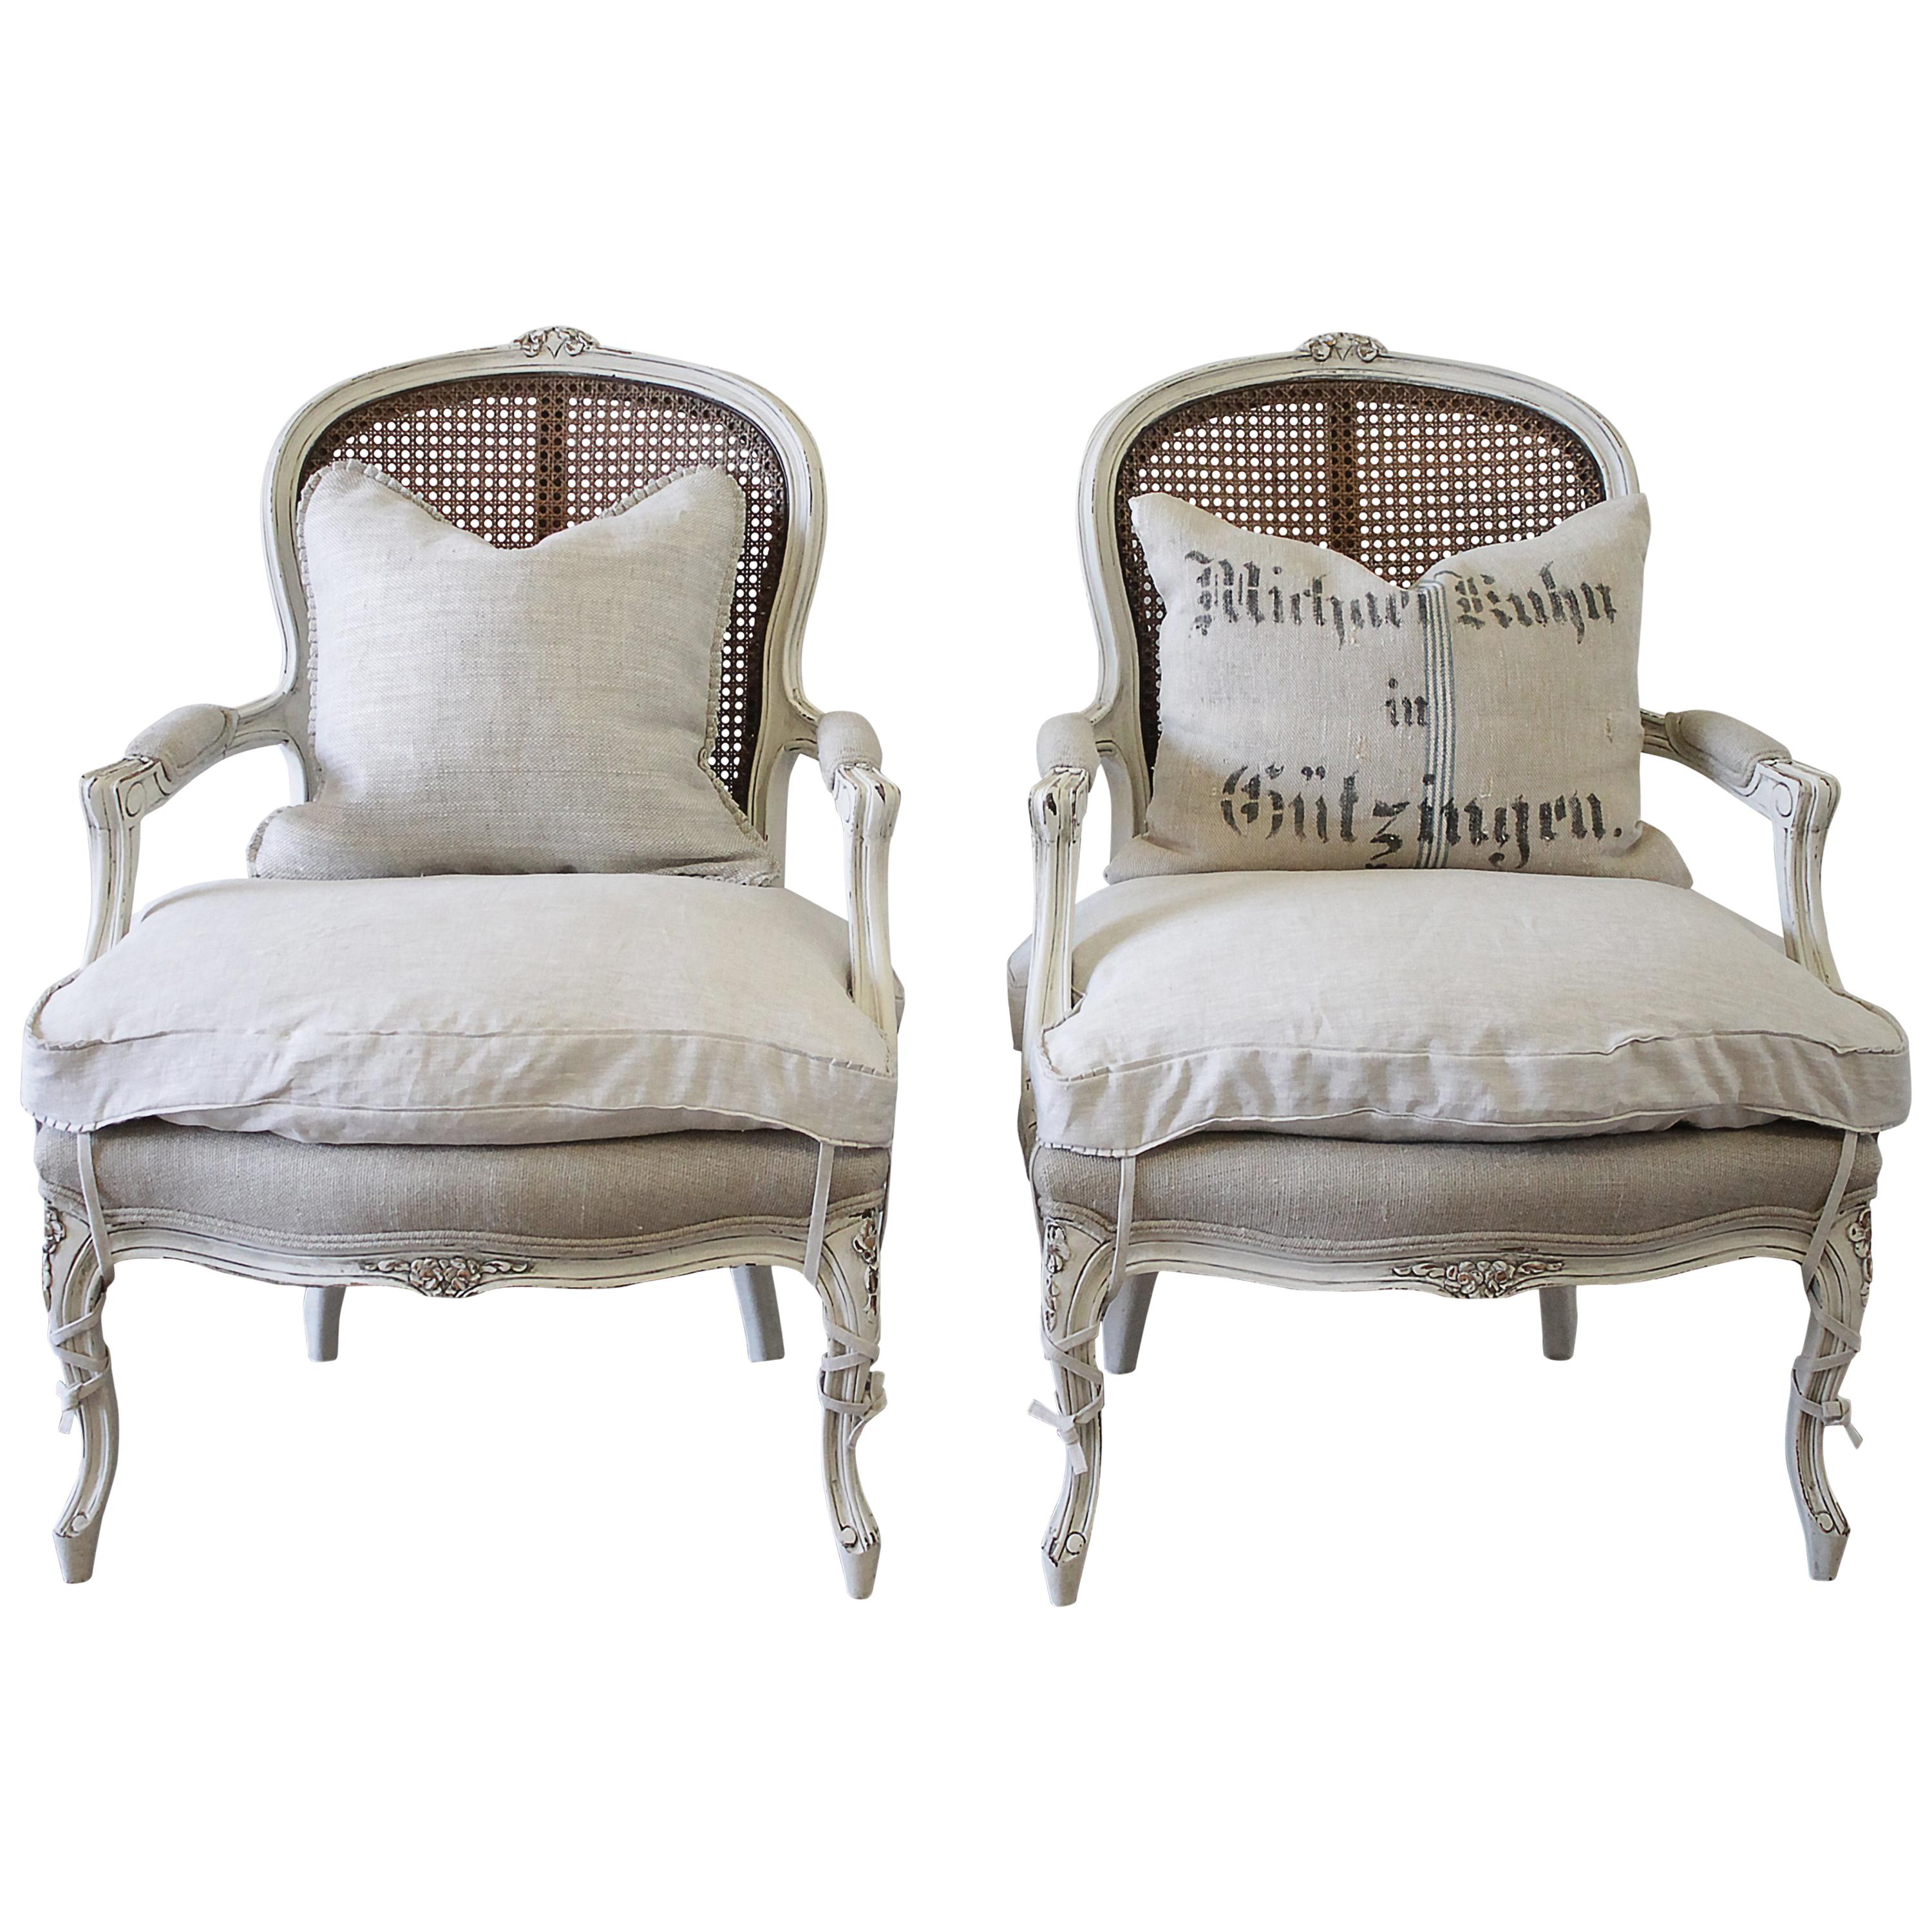 20th Century Pair of Painted Louis XV Style Painted Cane Back Chairs